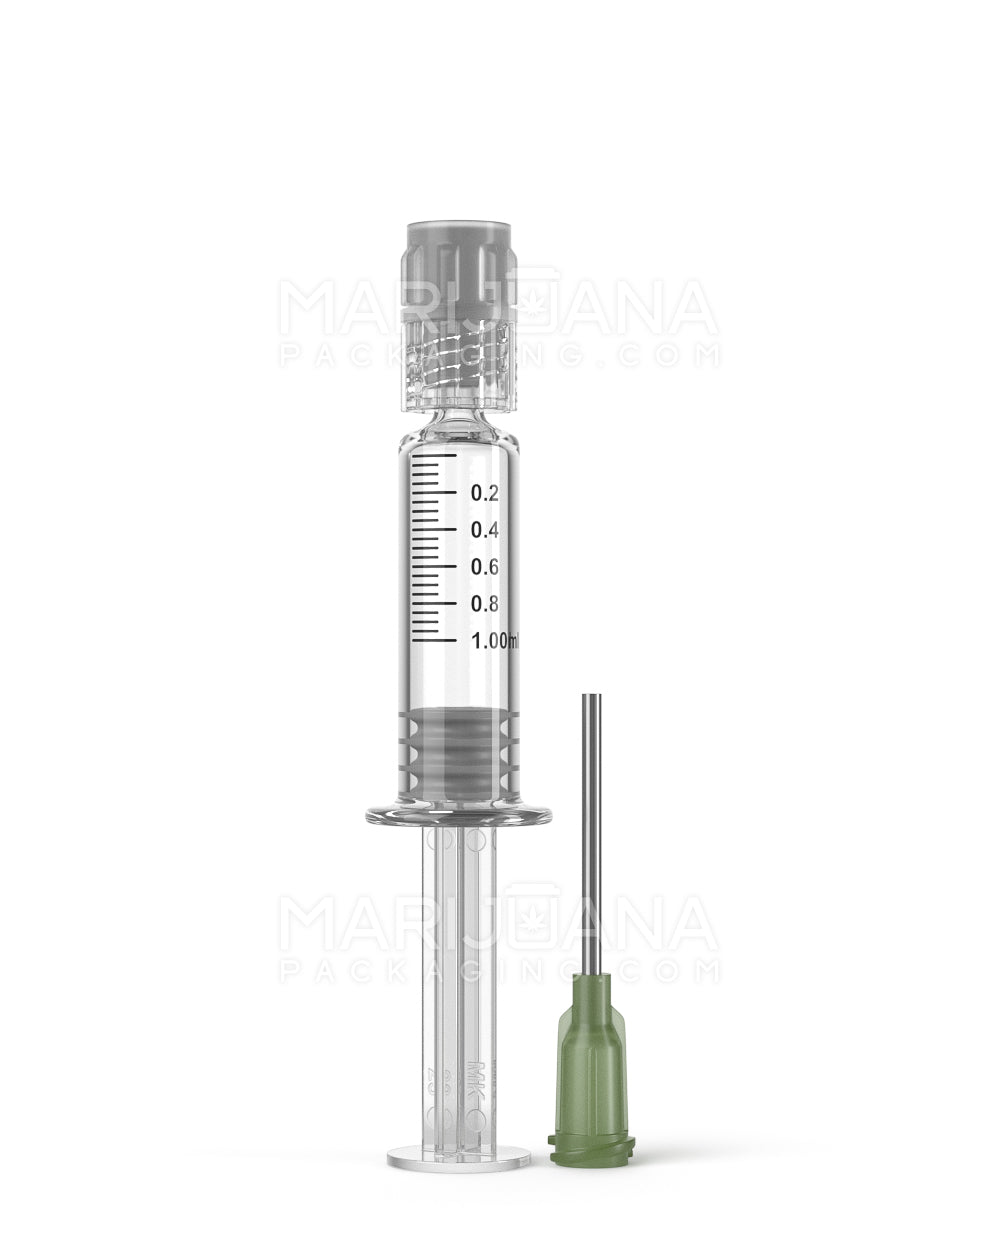 Luer Lock | Glass Dab Applicator Syringes w/ Needle Tip | 1mL - 0.2mL Increments - 100 Count - 1